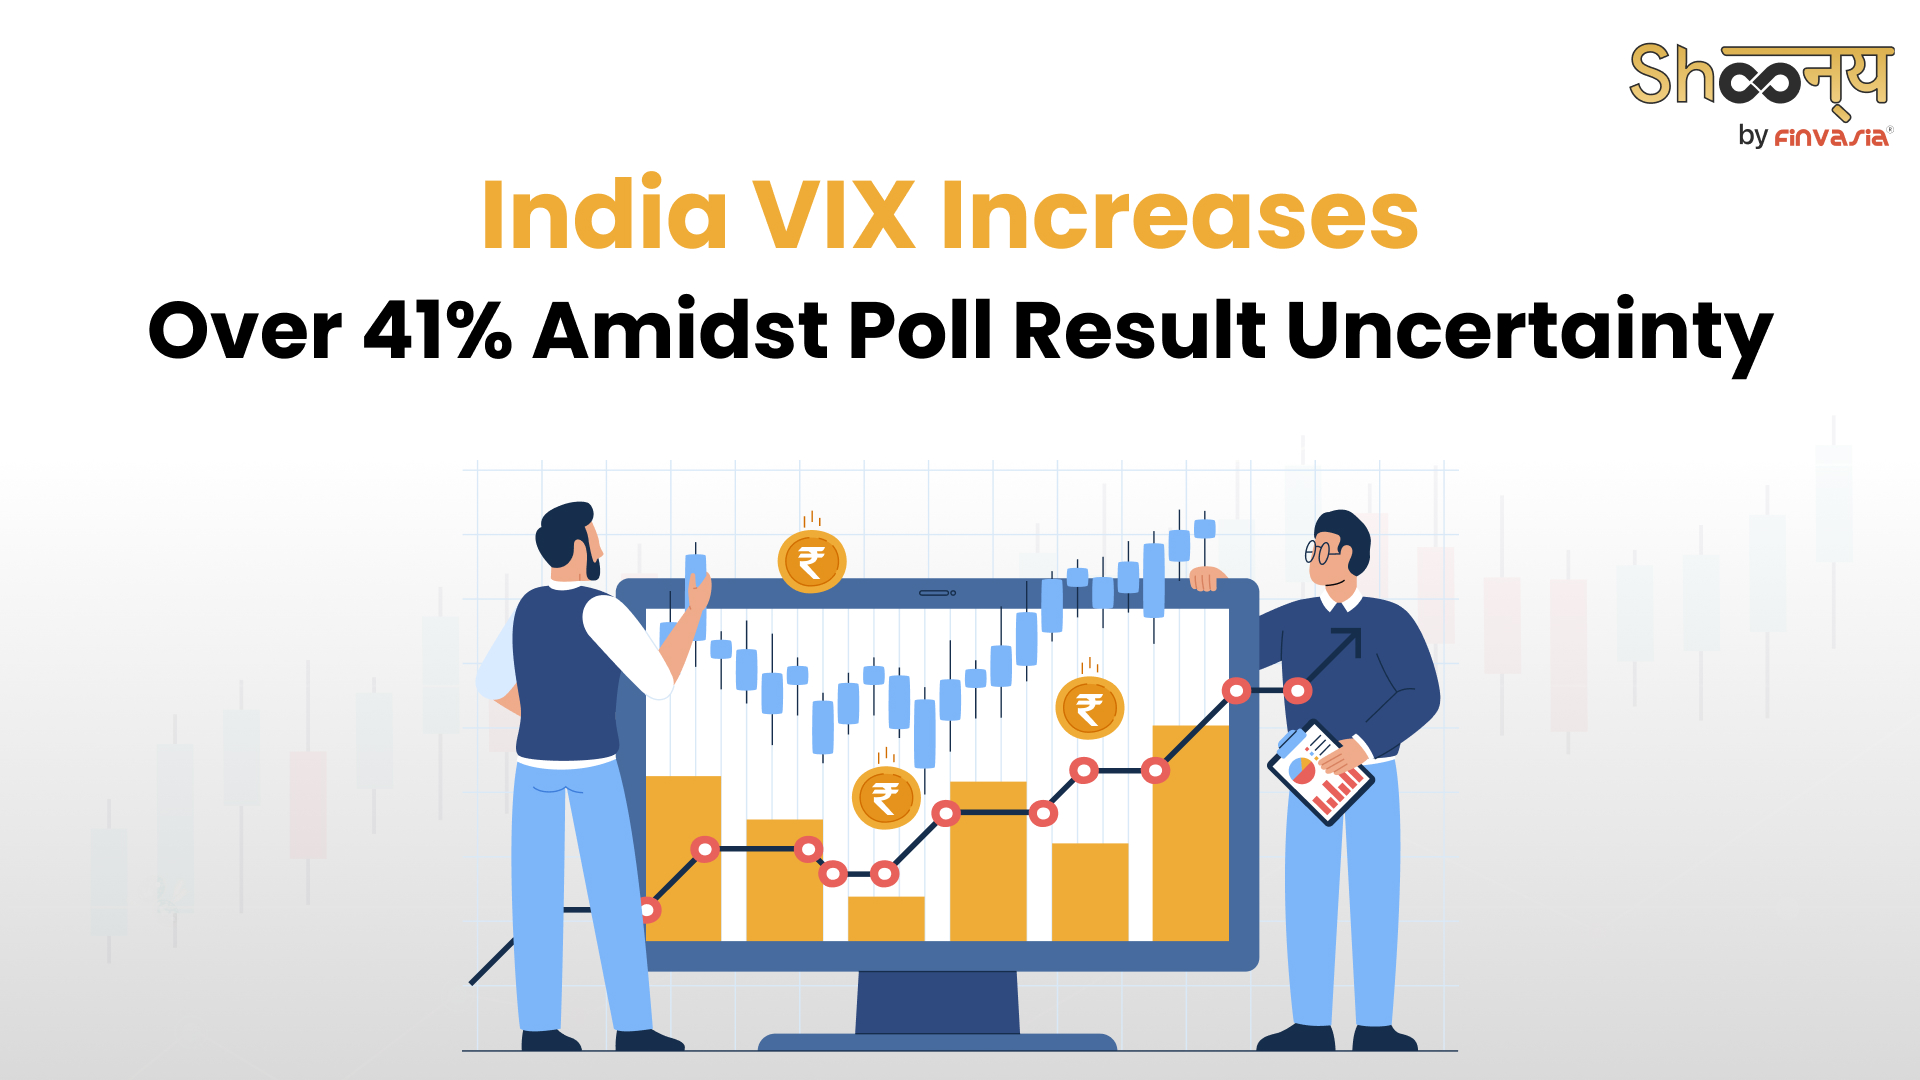 Uncertainty pushed India VIX to surge more than 41%